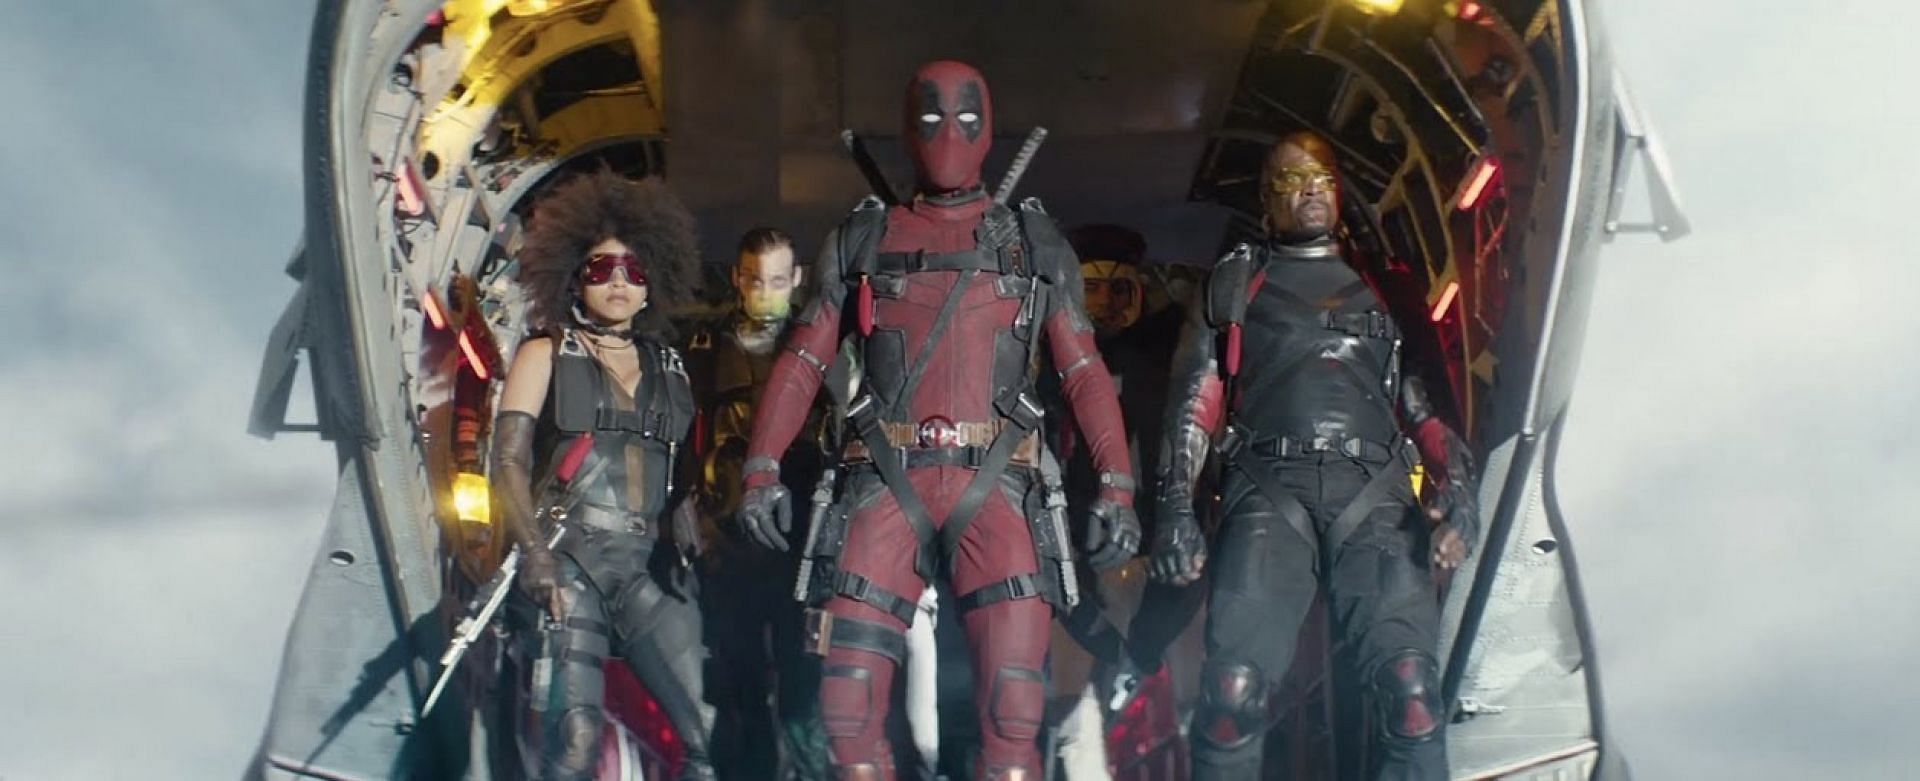 Ryan Reynolds teases fans with the possibility of an X-Force reunion and more character returns in the highly anticipated Deadpool 3 (Image via 20th Century Fox)